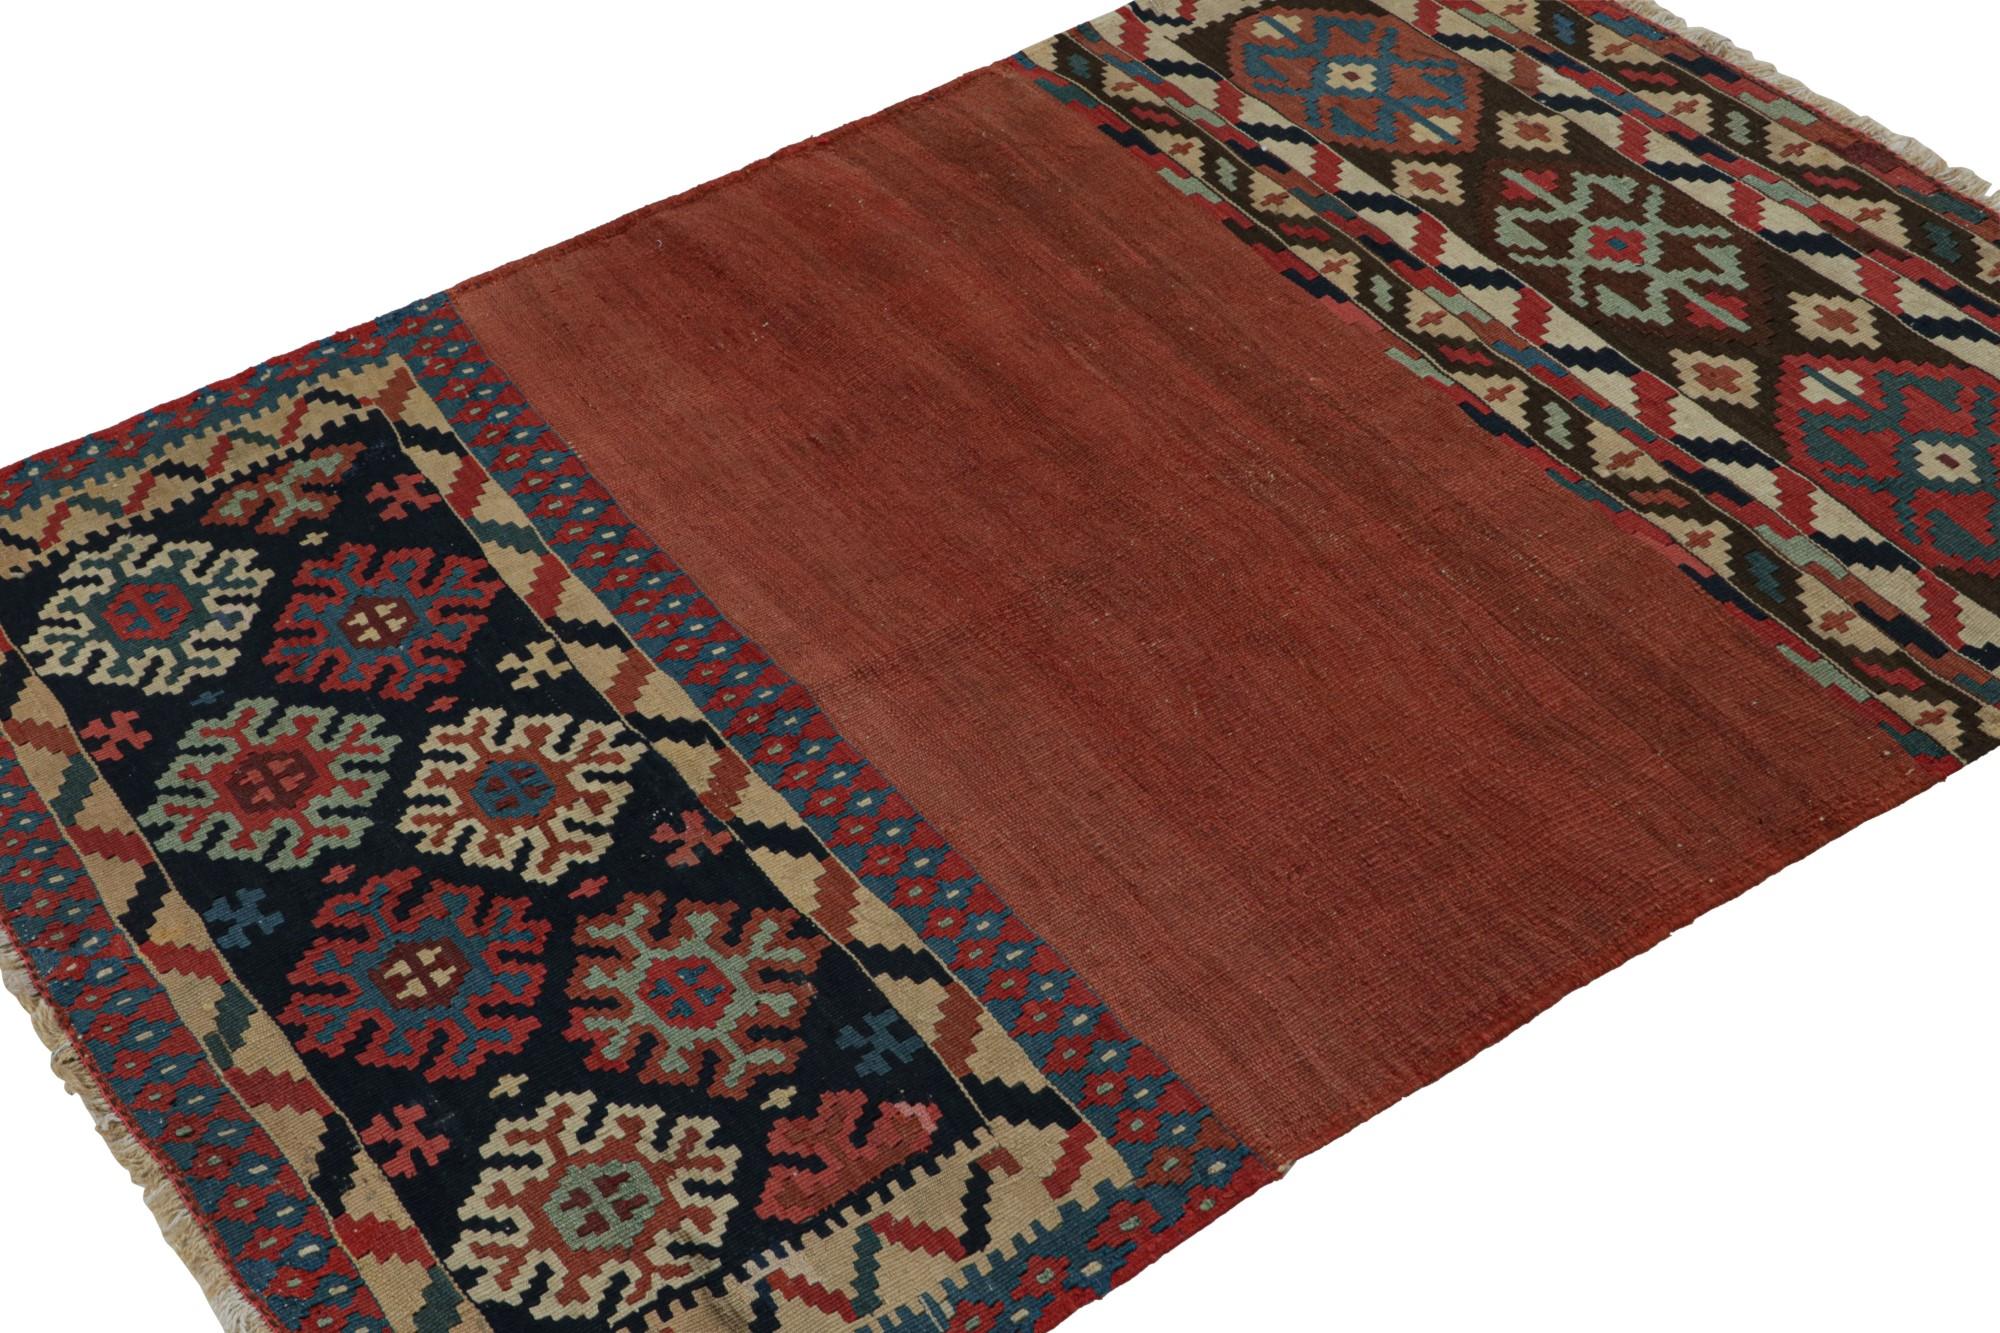 Hand knotted in wool, this 4x5 Afghan tribal kilim represents a new line of tribal carpets in the Modern Classics Collection by Rug & Kilim. Each piece represents the work of women weavers in Afghanistan, preserving the rich tradition of their